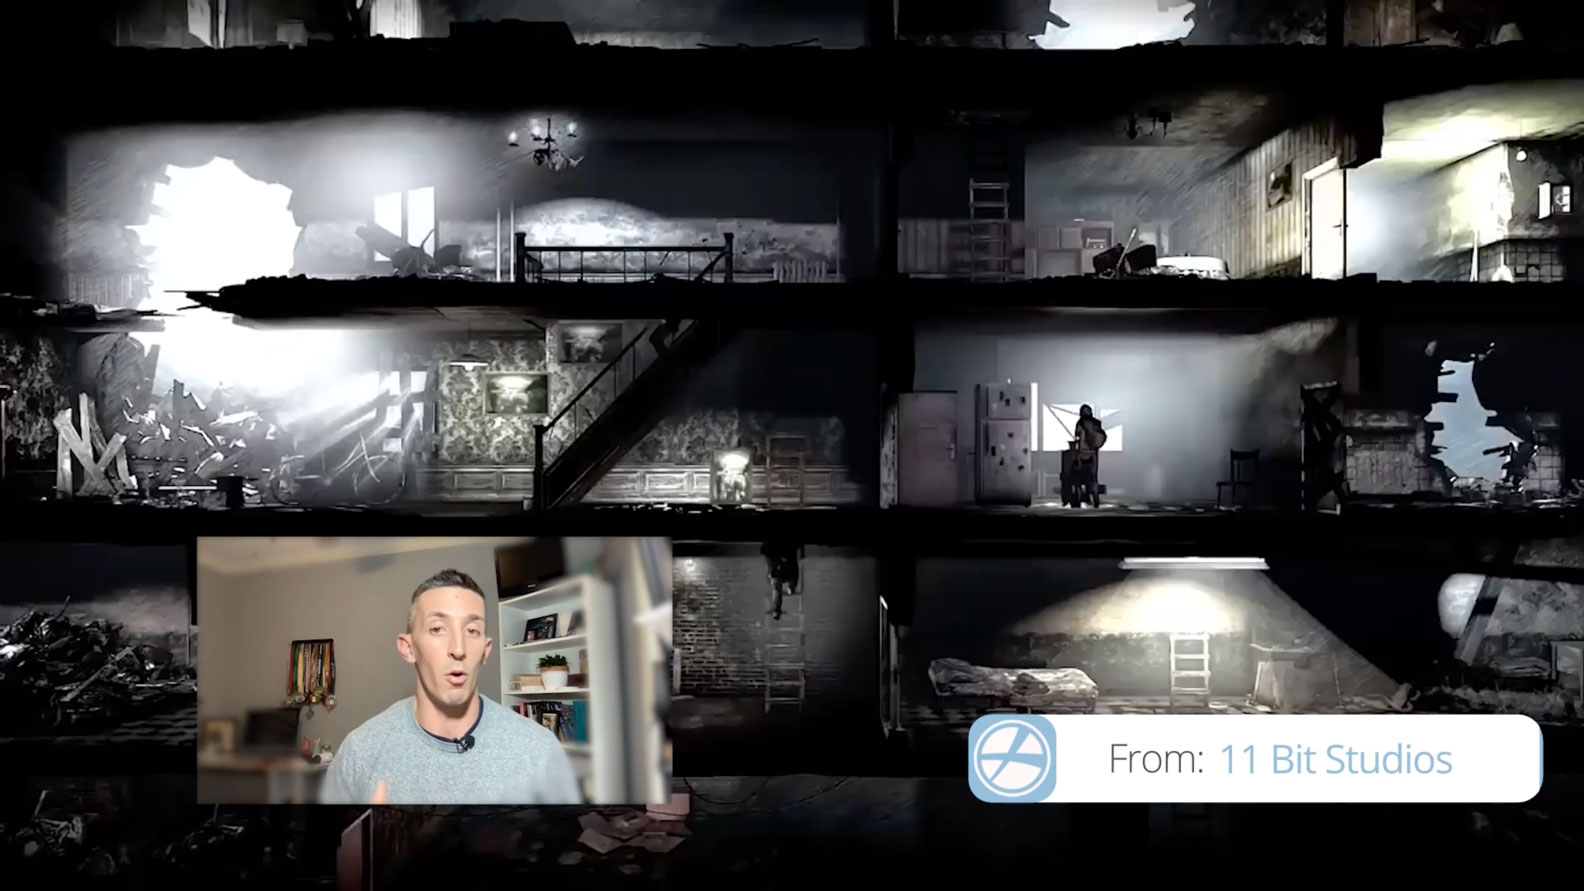 Shane is super imposed over footage of the game This War of Mine